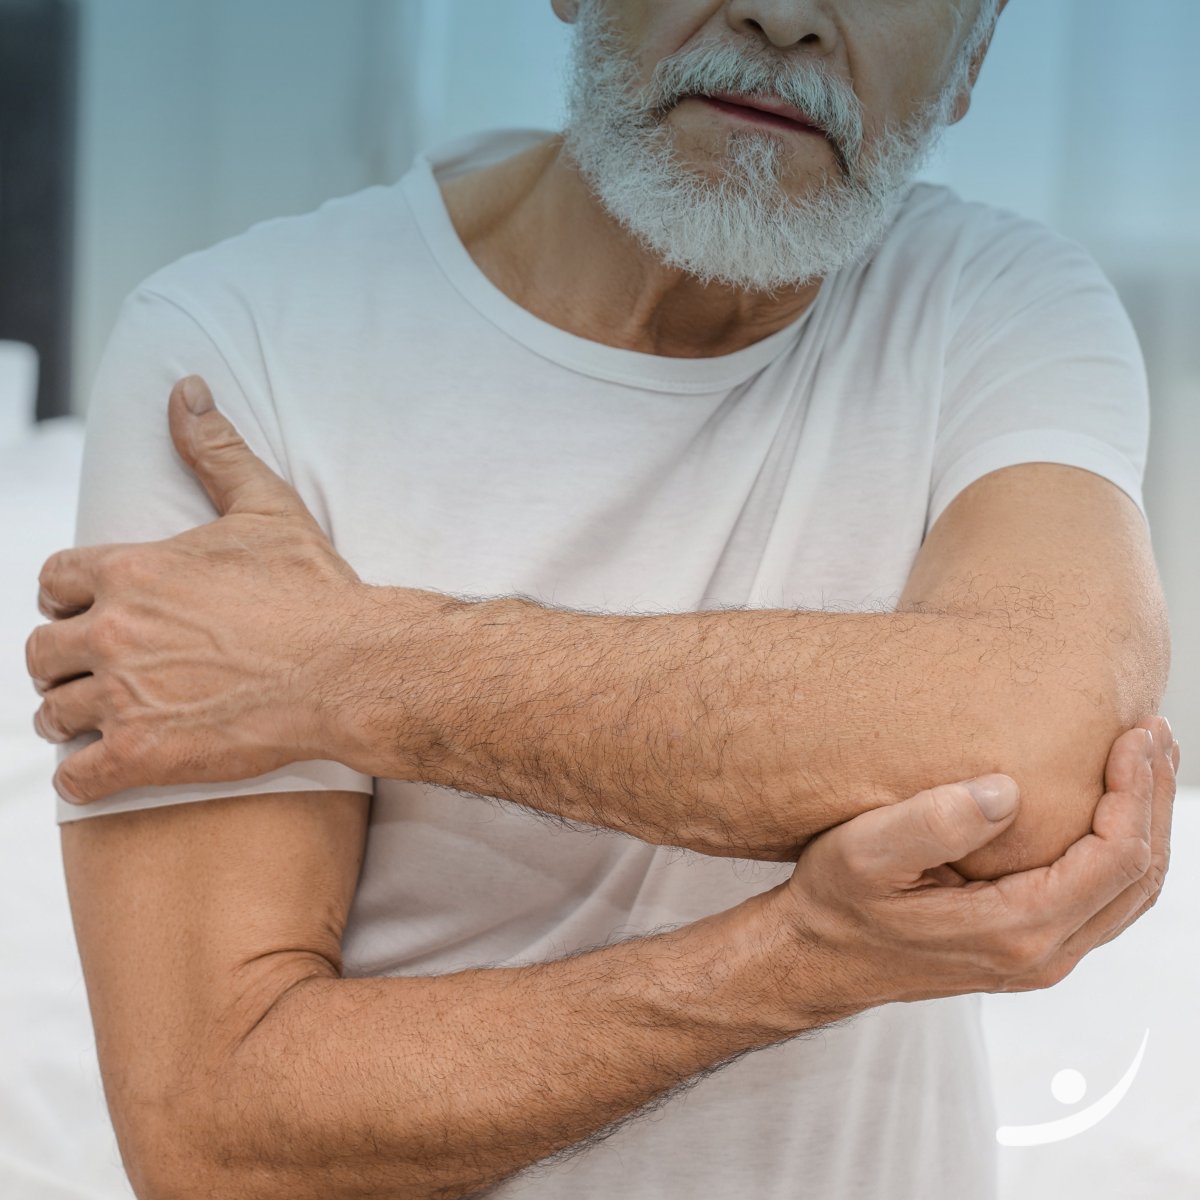 Feeling elbow pain? Read our article to learn the symptoms of elbow arthritis and find out when to see a specialist → hubs.li/Q02snnbP0 #ElbowArthritis #ElbowArthritisPain #ElbowDoctor #ElbowSpecialist #ElbowSurgeon #ElbowPain #ElbowPainRelief